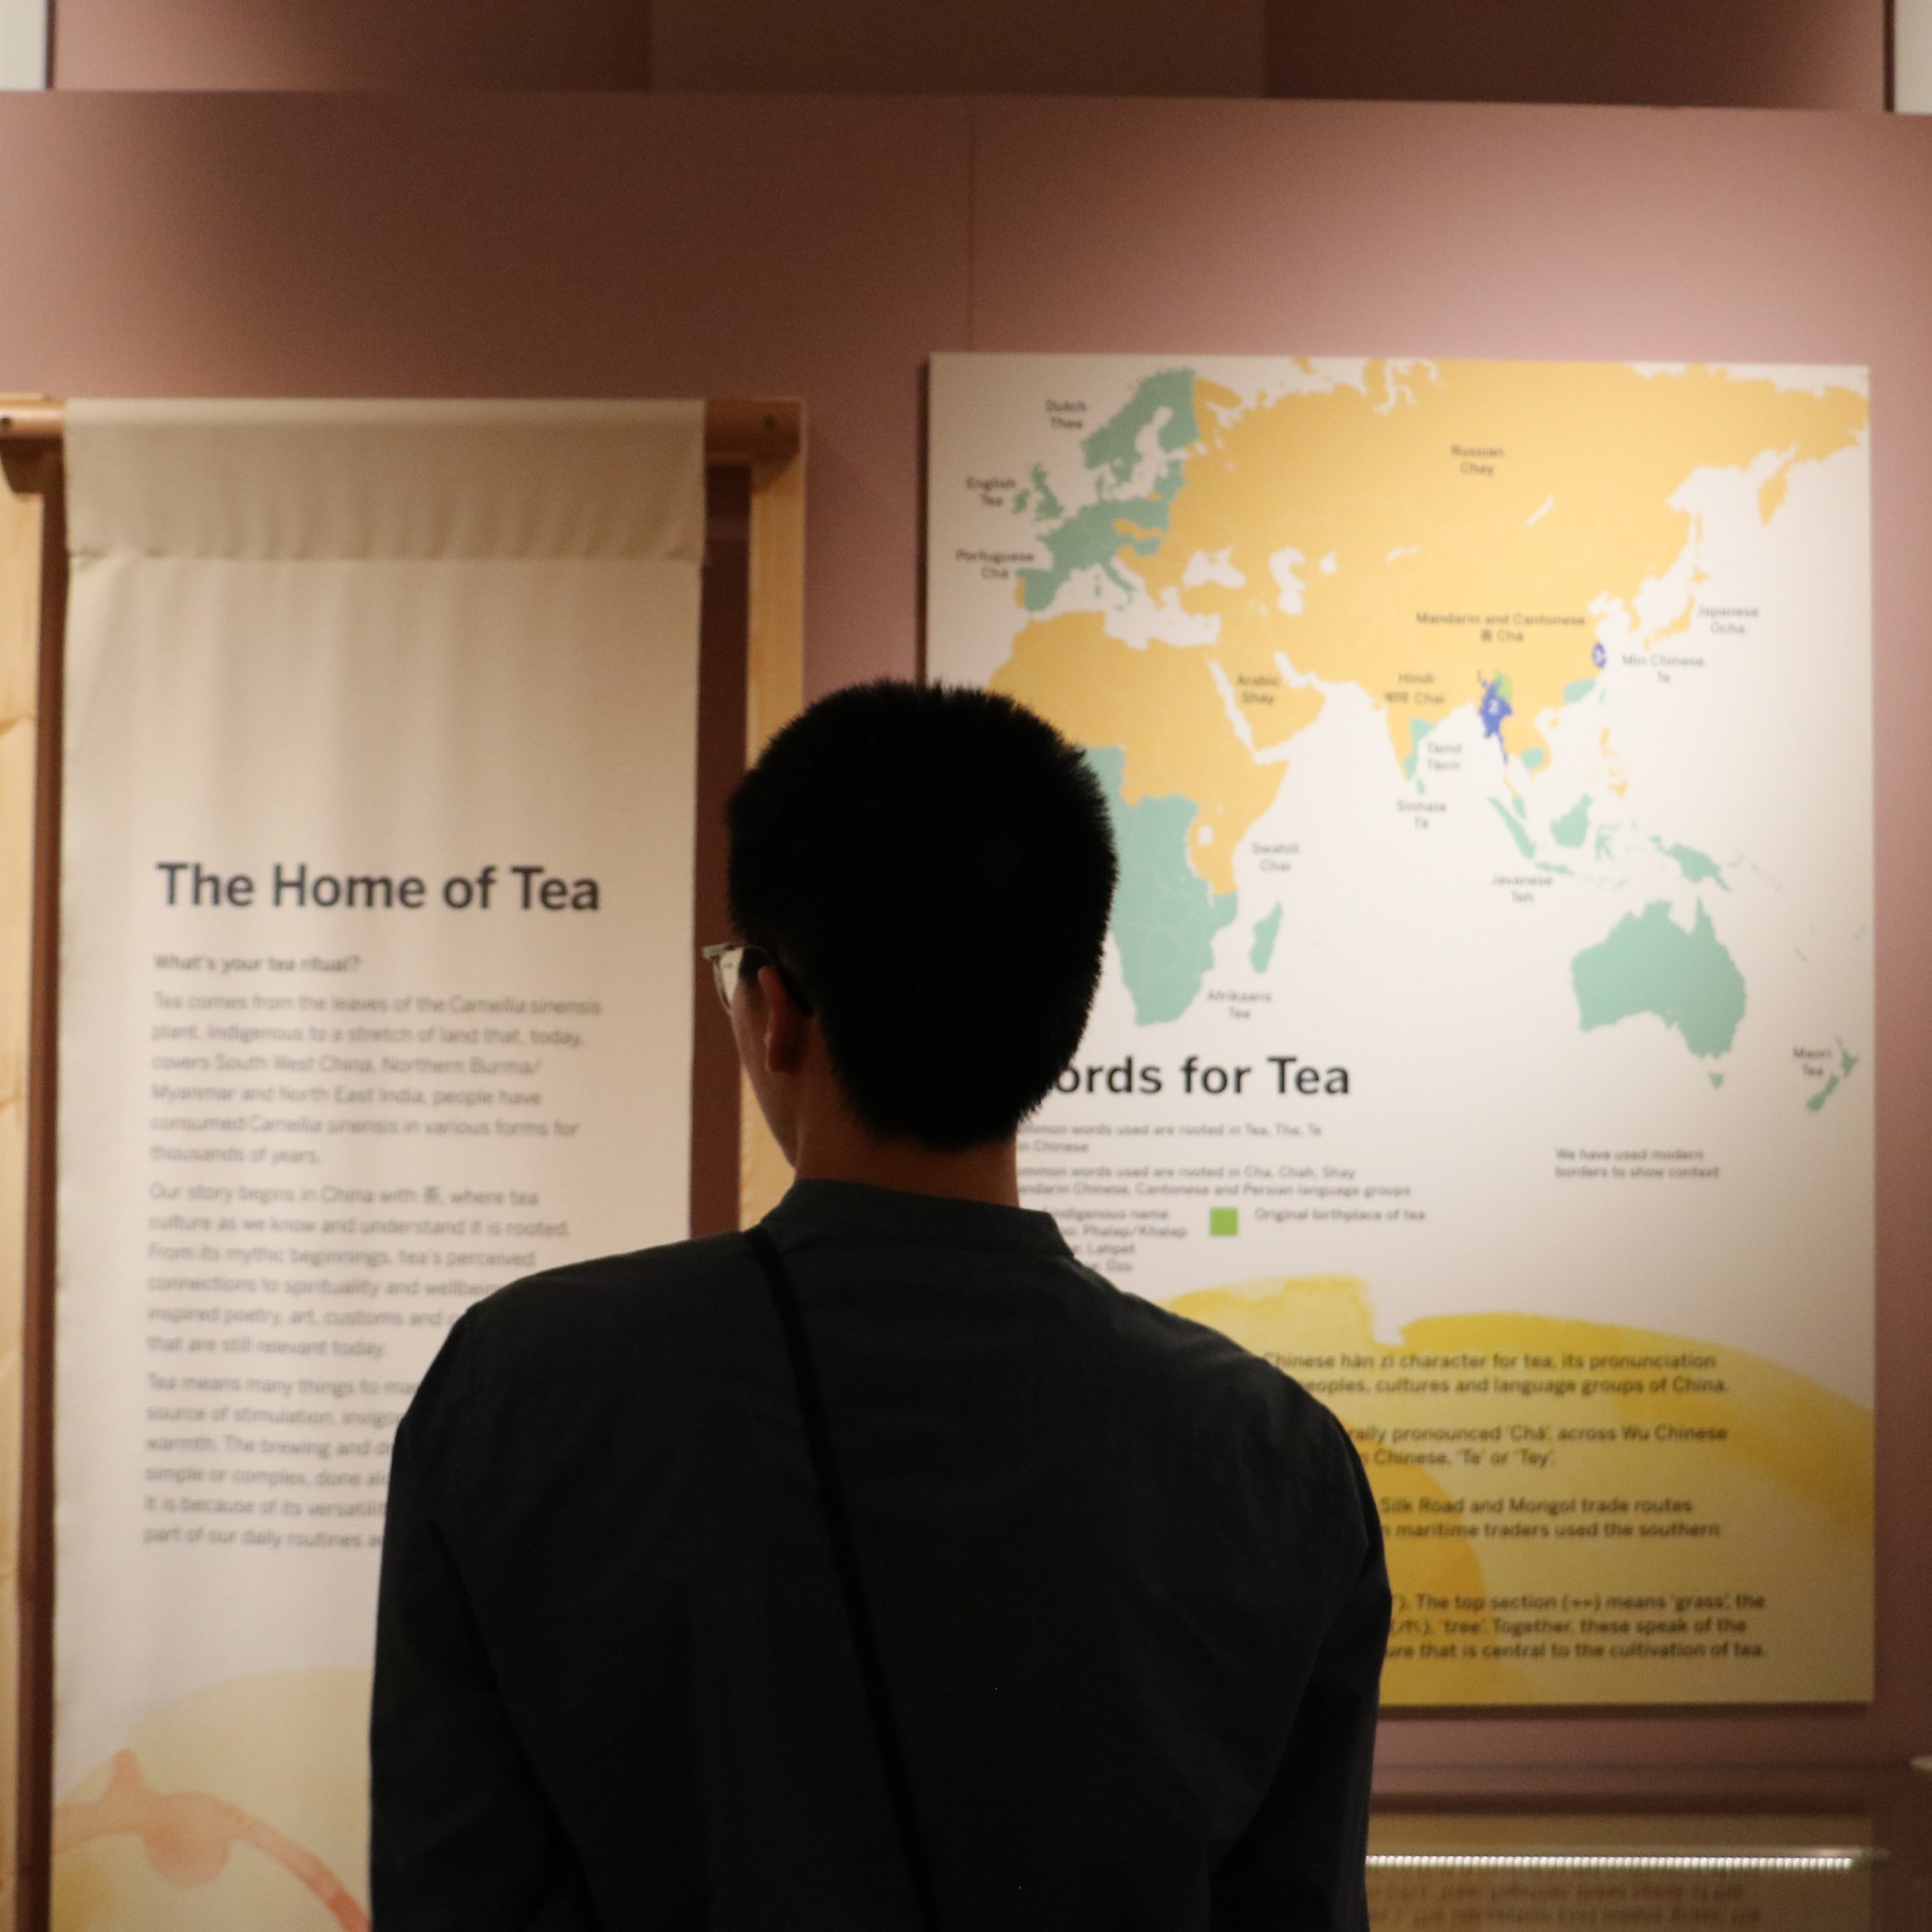 A person from behind, looking at a vertical banner of text 'The Home of Tea' alongside larger panel featuring a map/infographic of 'Words for Tea'.